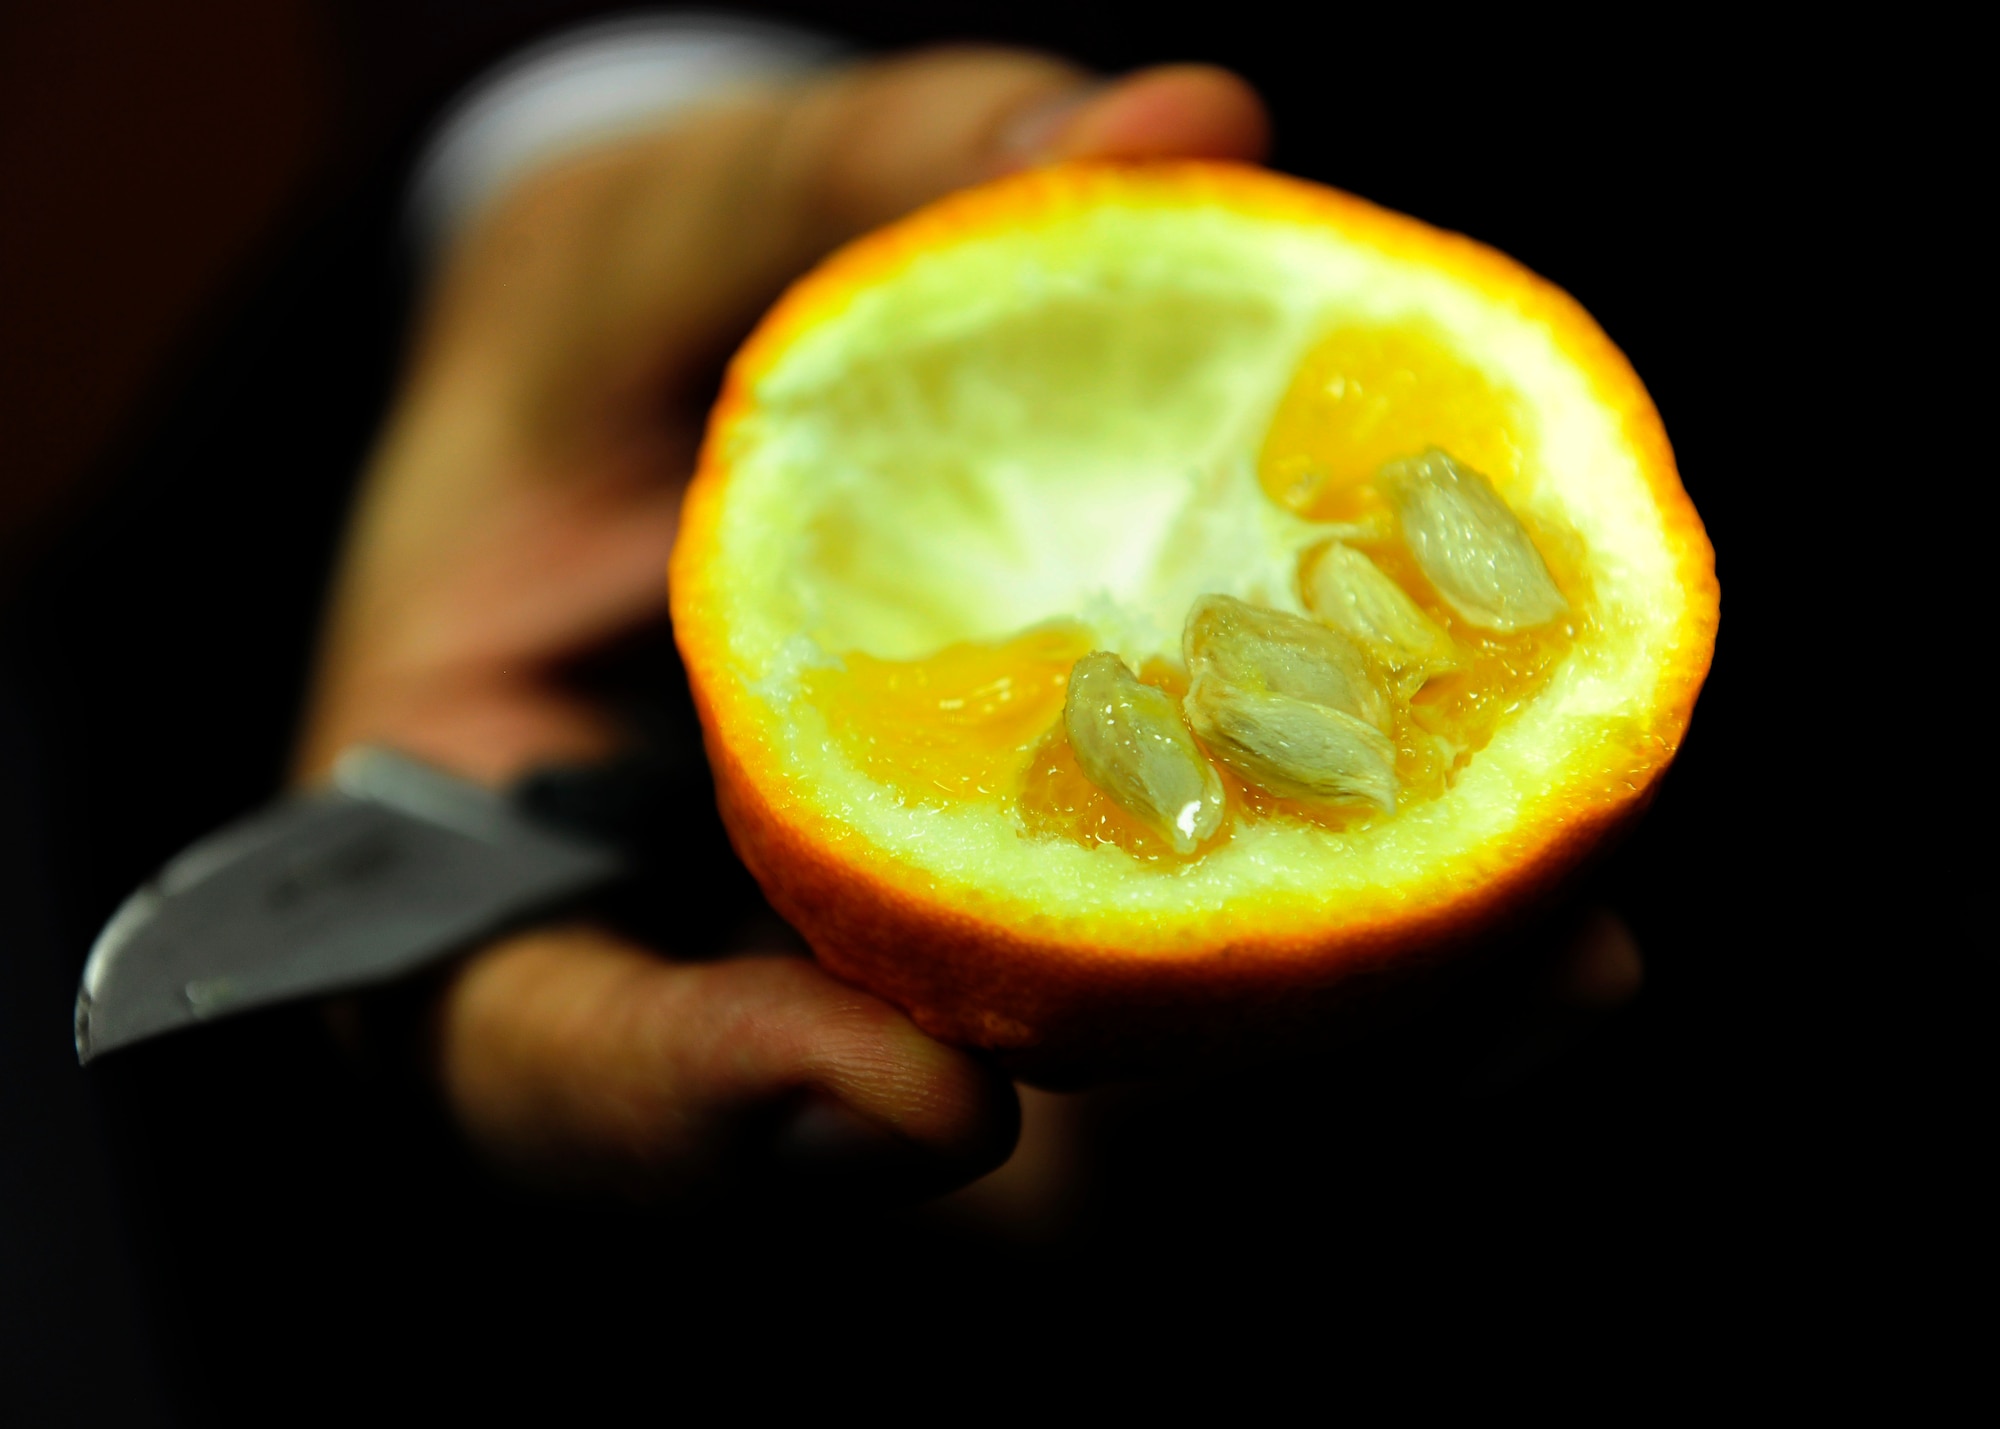 Known as the mother tree for all citrus trees, the Turunc tree produces fruit that is bitter and juicy. Seeds from the Turunc tree are used to grow other types of citrus trees including orange, tangerine and lemon. (U.S. Air Force photo by Senior Airman Ardrey/Released)